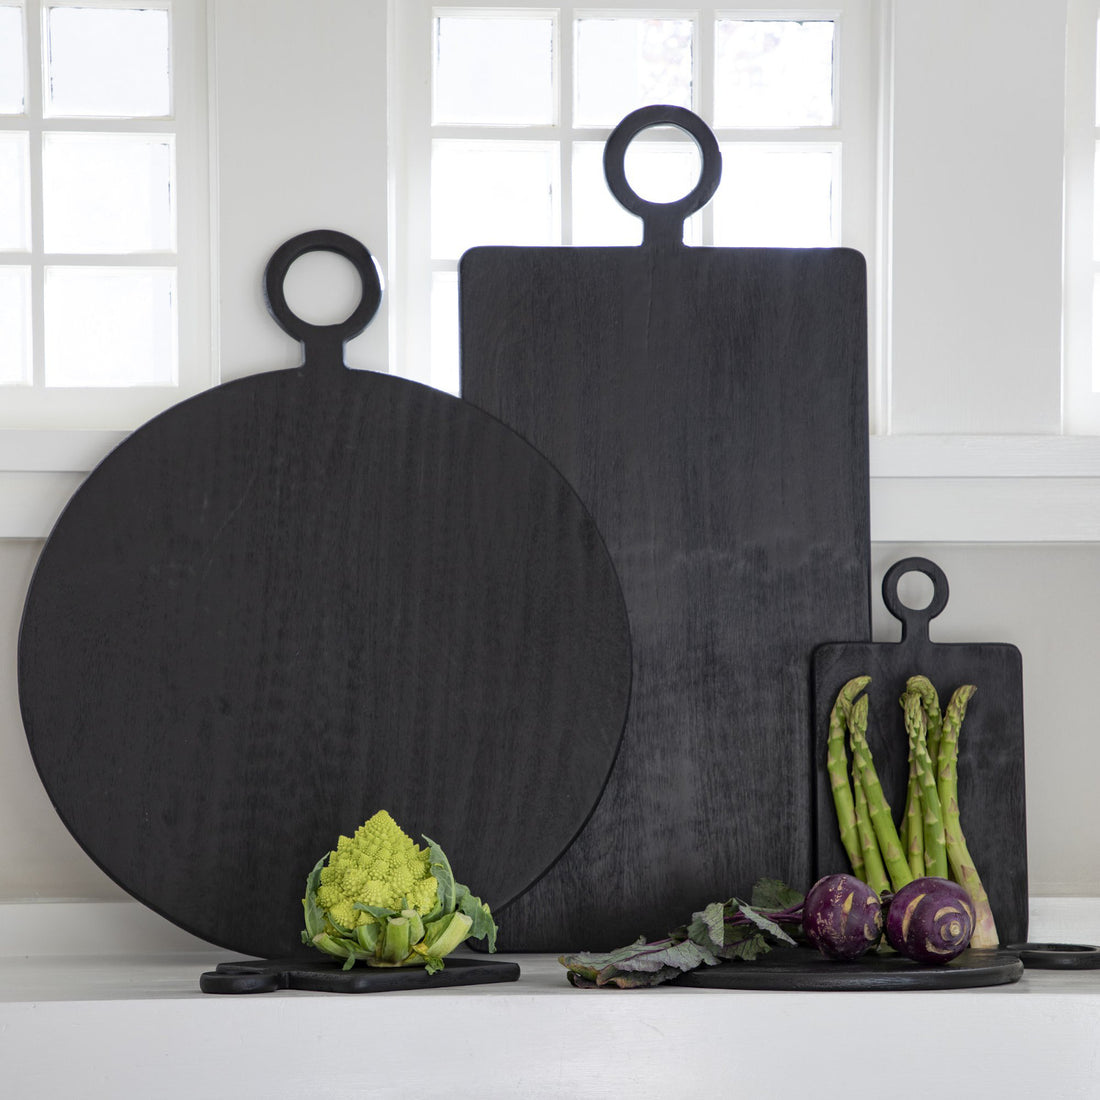 A set of three Be Home Blackened Serving Boards of different shapes and sizes with fresh vegetables displayed in front of a window.